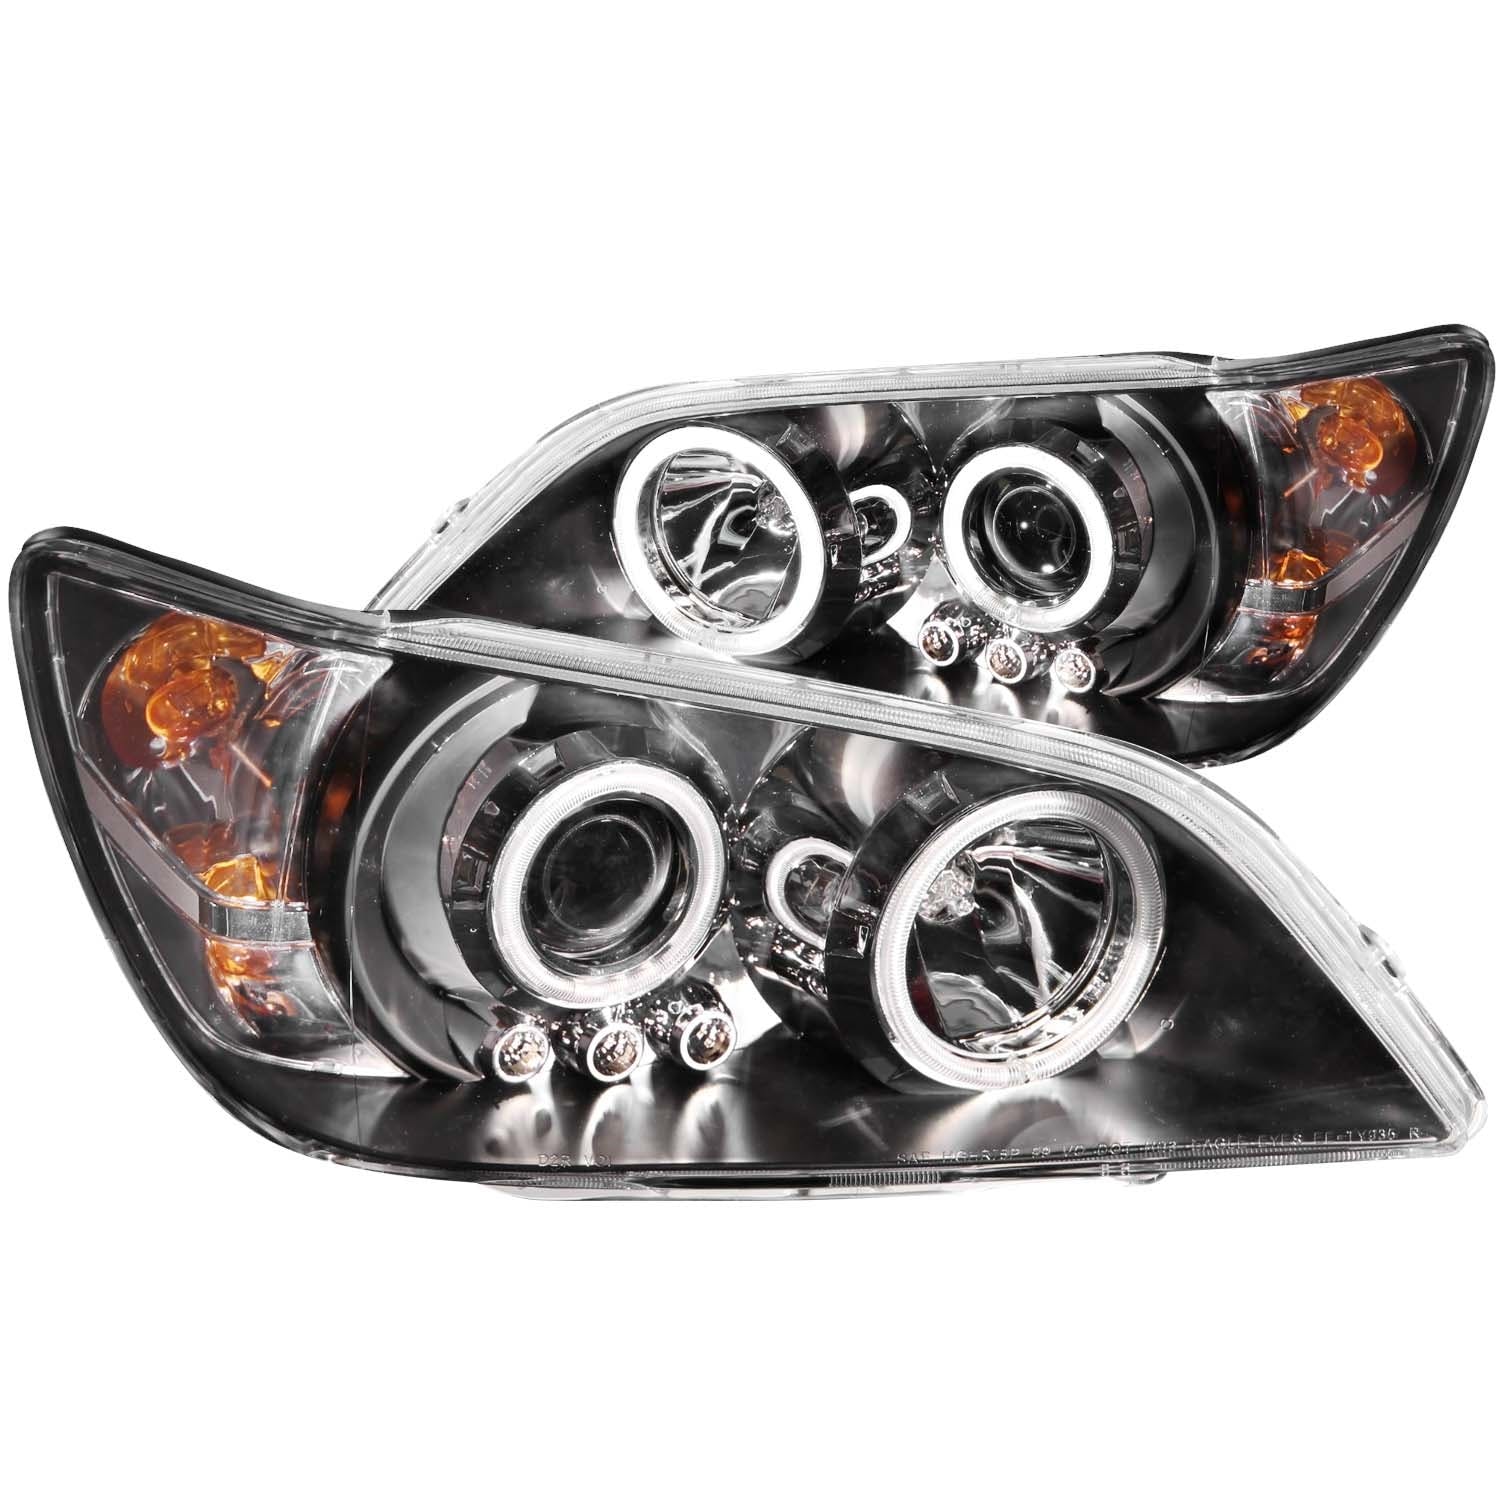 AnzoUSA 121199 Projector Headlights with Halo Black